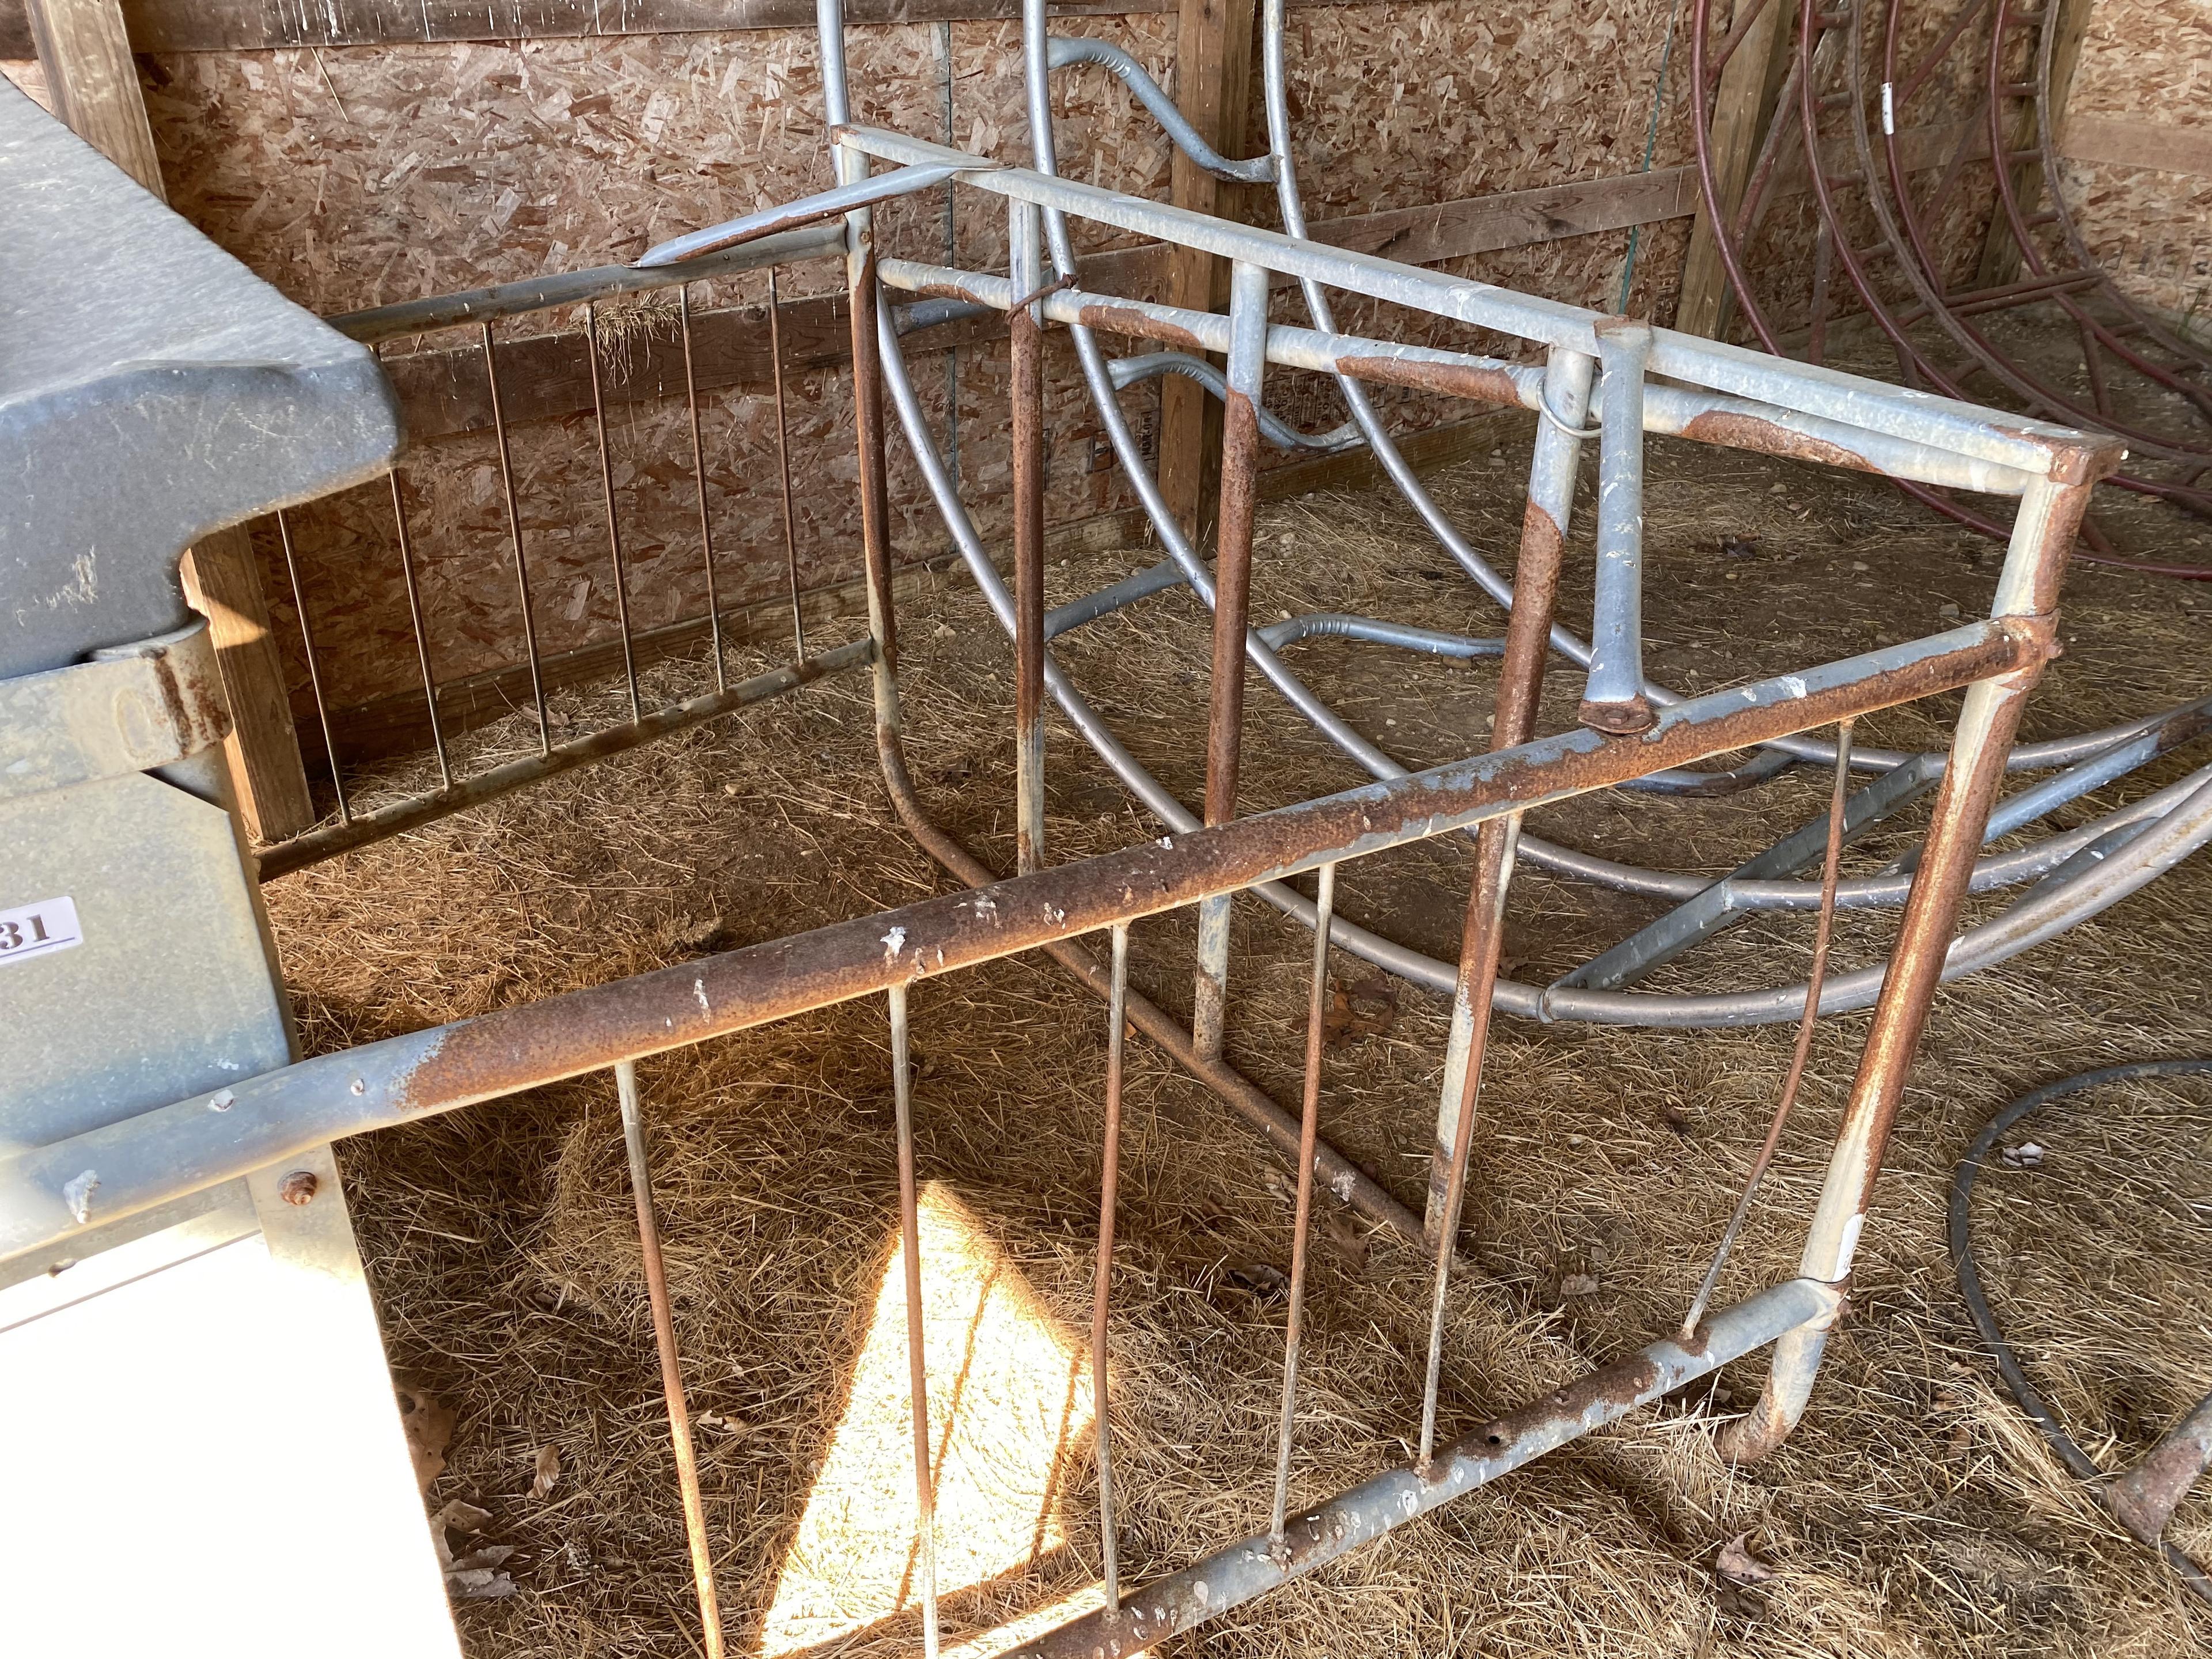 Metal and plastic cattle bale feeder